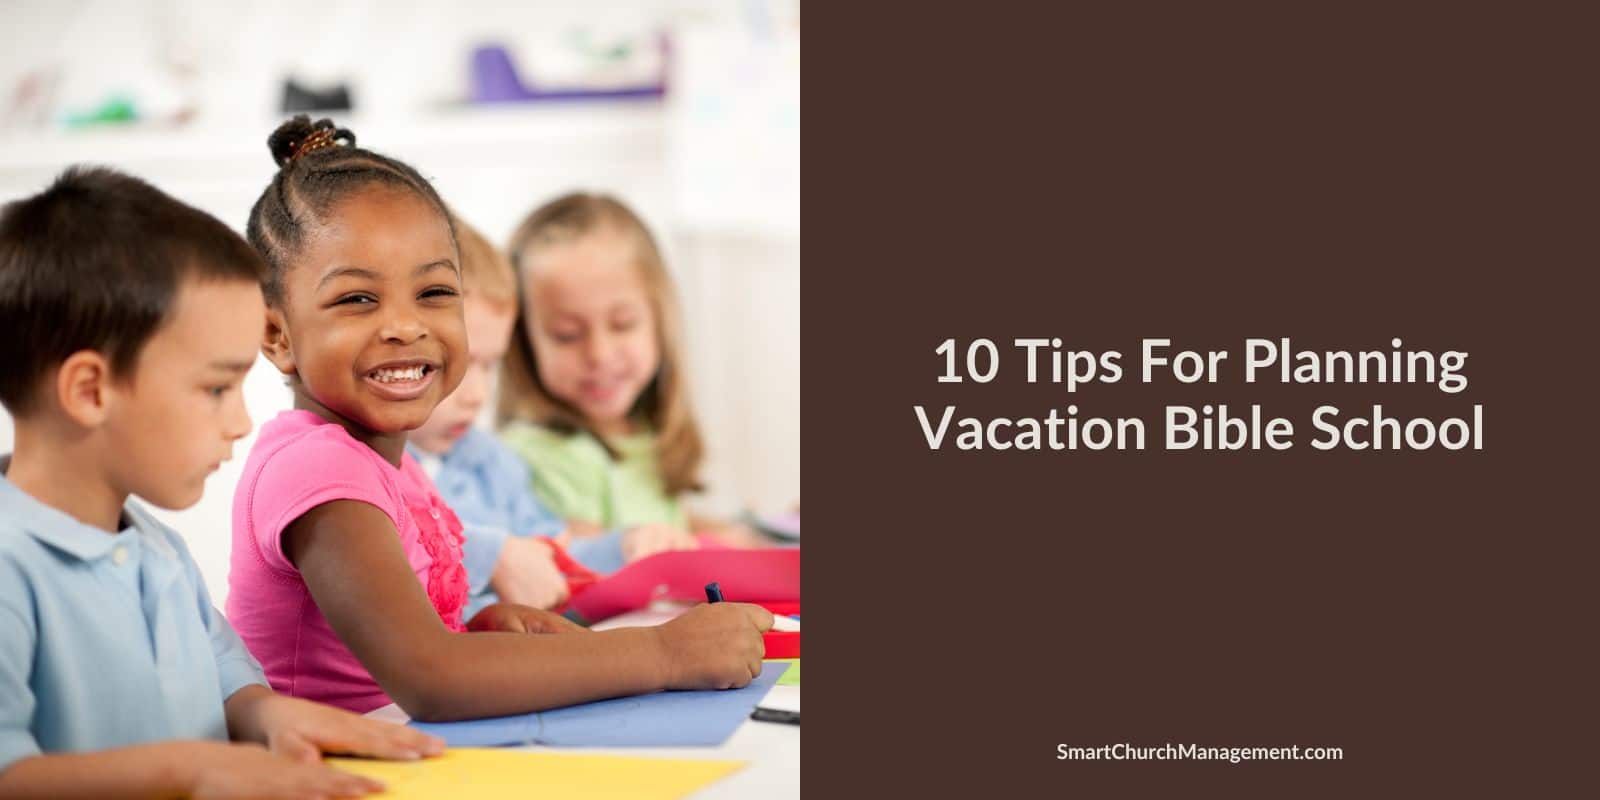 Tips for planning a vacation bible school